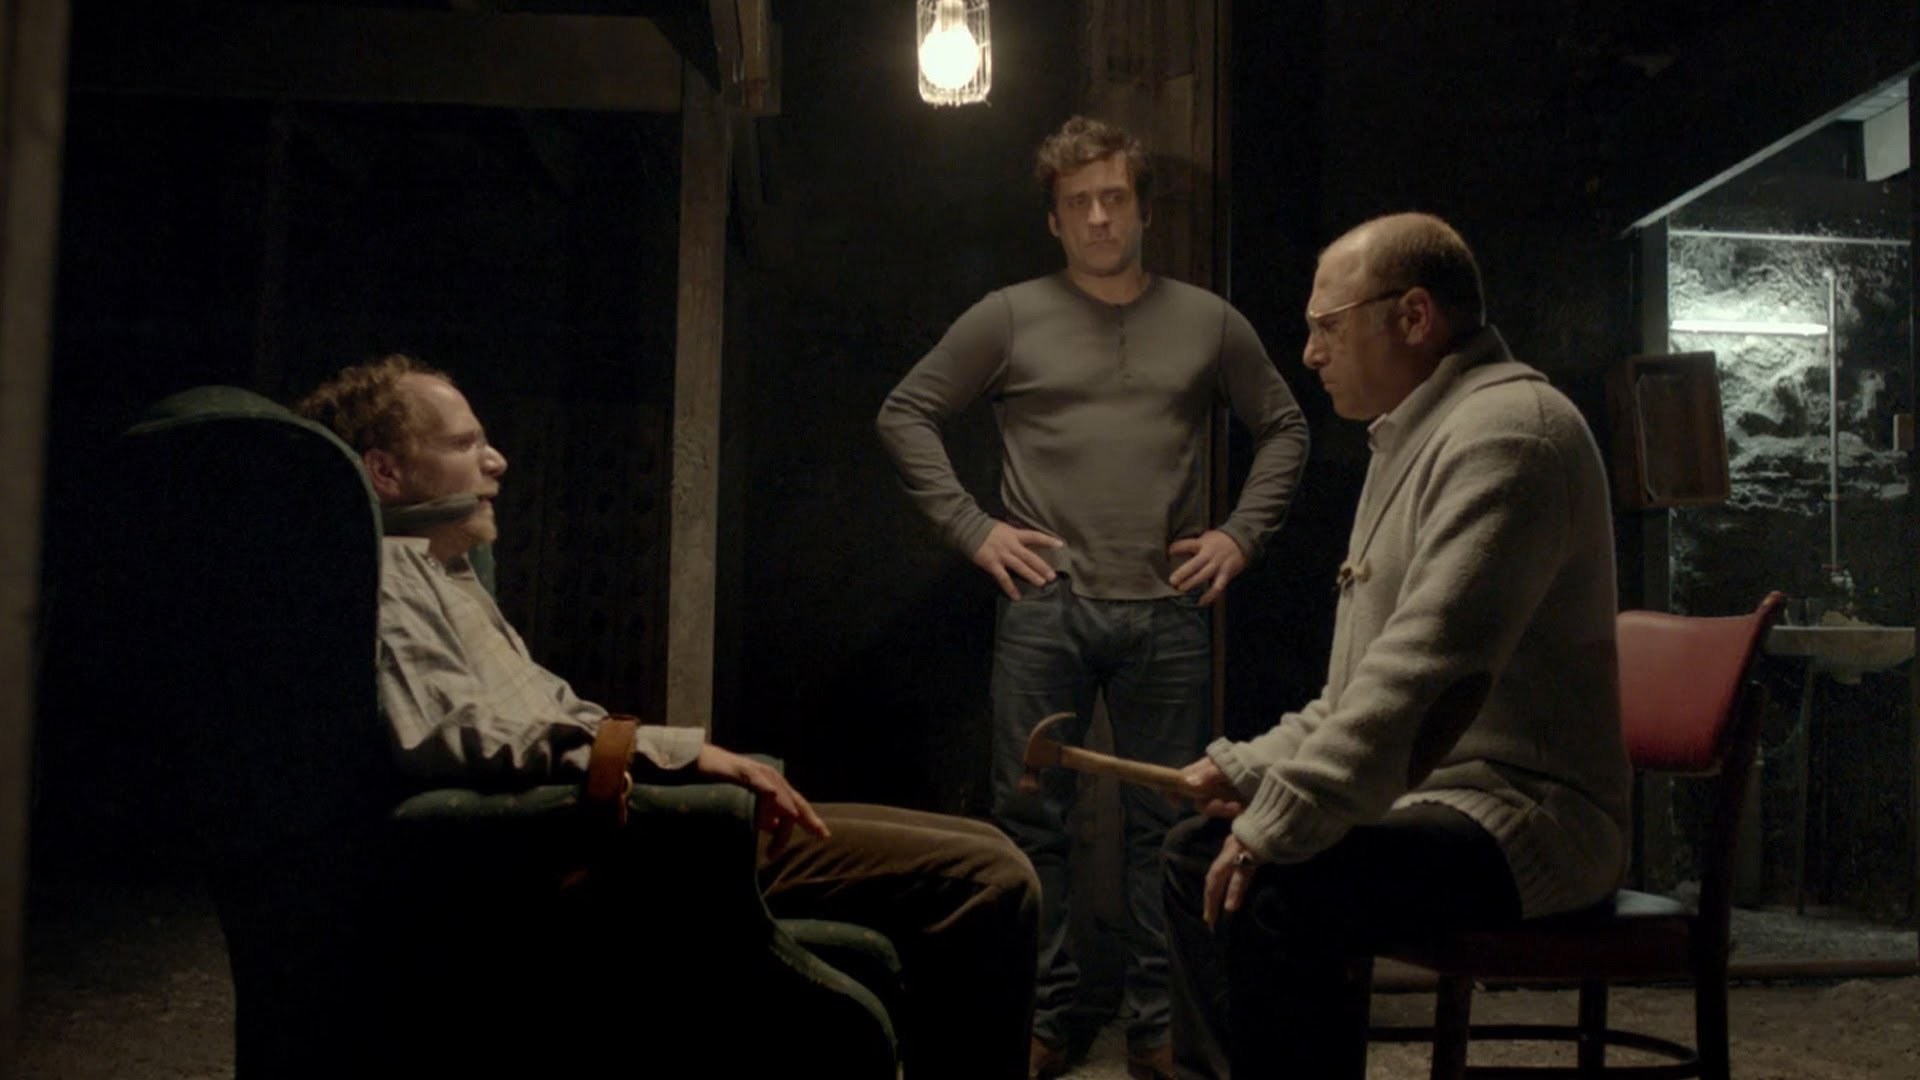 (l to r) Suspected killer Dror (Rotam Keinan) imprisoned by detective Mickey (Lior Ashkenazi) and victim's father Gidi (Tzahi Grad) in Big Bad Wolves (2013)